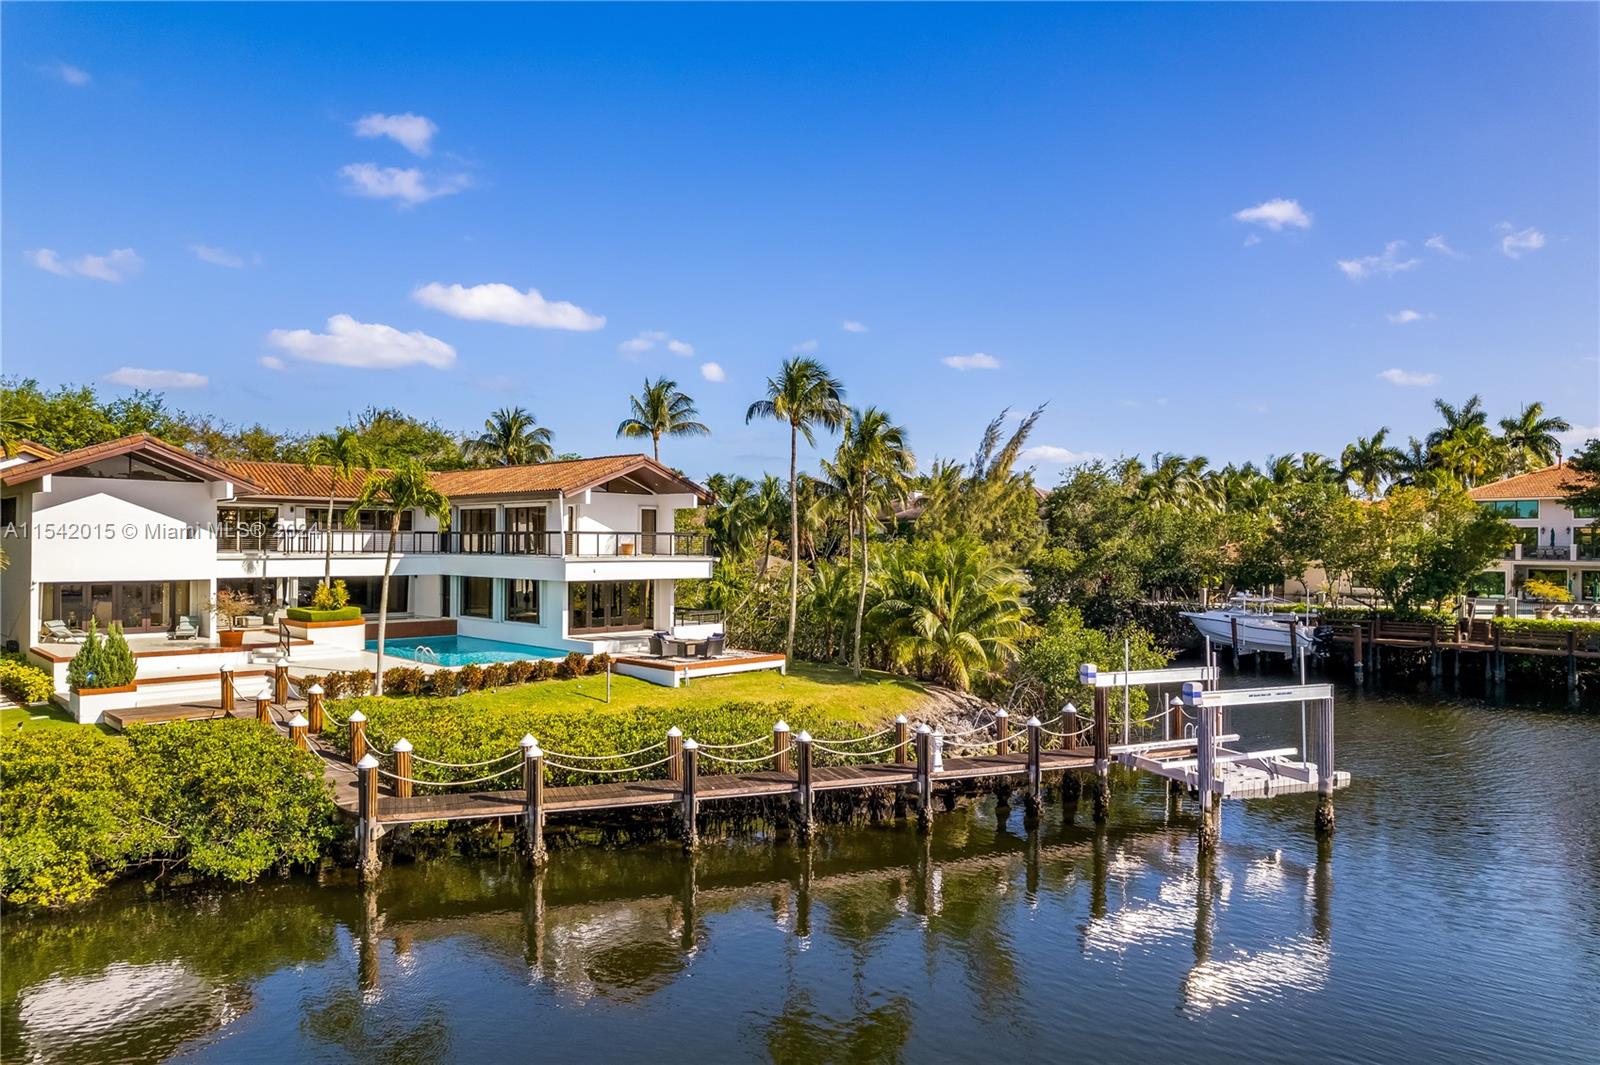 Be amazed by the breathtaking water views from this home with over 300 feet waterfront in Islands of Cocoplum. The spacious driveway leads to a secluded setting for this home with ample spaces overlooking the water views. First floor features formal living room, dining room and family room, two bedrooms and office on first floor. Second floor features a large sitting area, four en-suites and main suite with a sitting area/office space. Large dock with boat-lift and two jet-ski platform were installed a few years ago. Islands of Cocoplum offers great indoors and outdoors amenities: gated entrance, security patrol, clubhouse, tennis courts, pool and exercise room. Please make sure to check out the video!